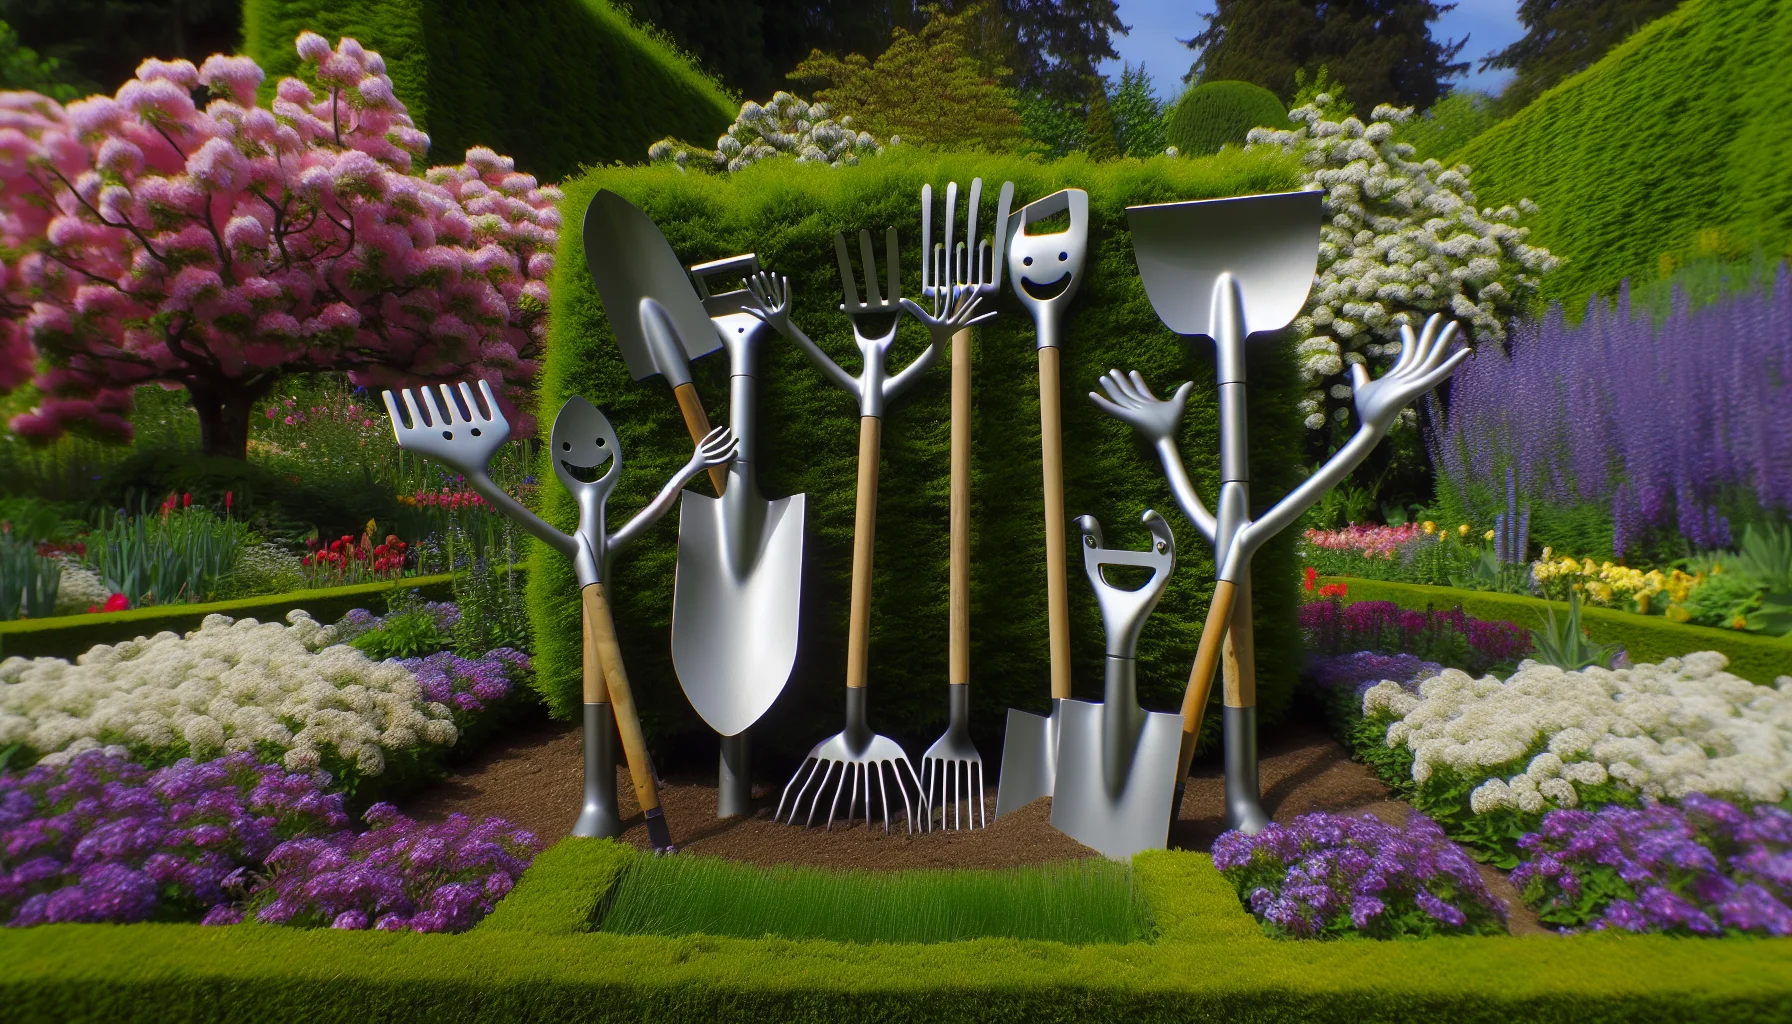 Generate a humorous scene situated in a lush, well-kept garden. The centerpiece is an enlistment of gardening tools: a shovel, a rake, and a pair of pruners, all sharpened to precision. These tools are anthropomorphically arranged as if they are joyfully dancing among the blossoming flowers and greenery. Their edges glimmer in the sunlight, signaling their readiness for action. This whimsical, lighthearted representation aims to invoke laughter and enthusiasm for the process of gardening among viewers.